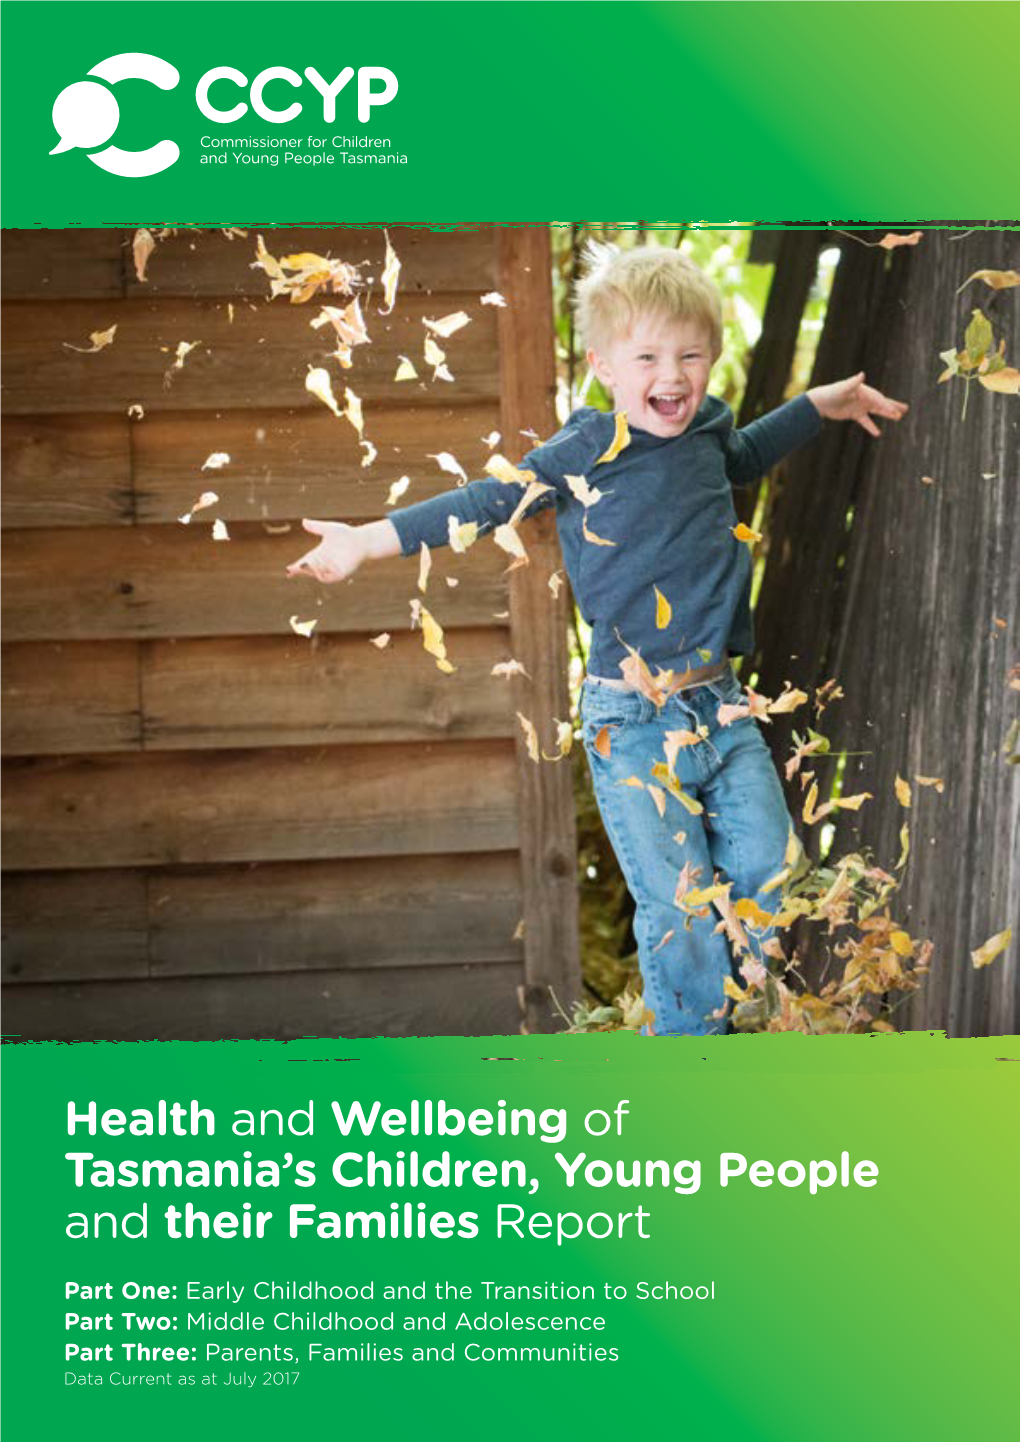 Health and Wellbeing of Tasmania's Children, Young People and Their